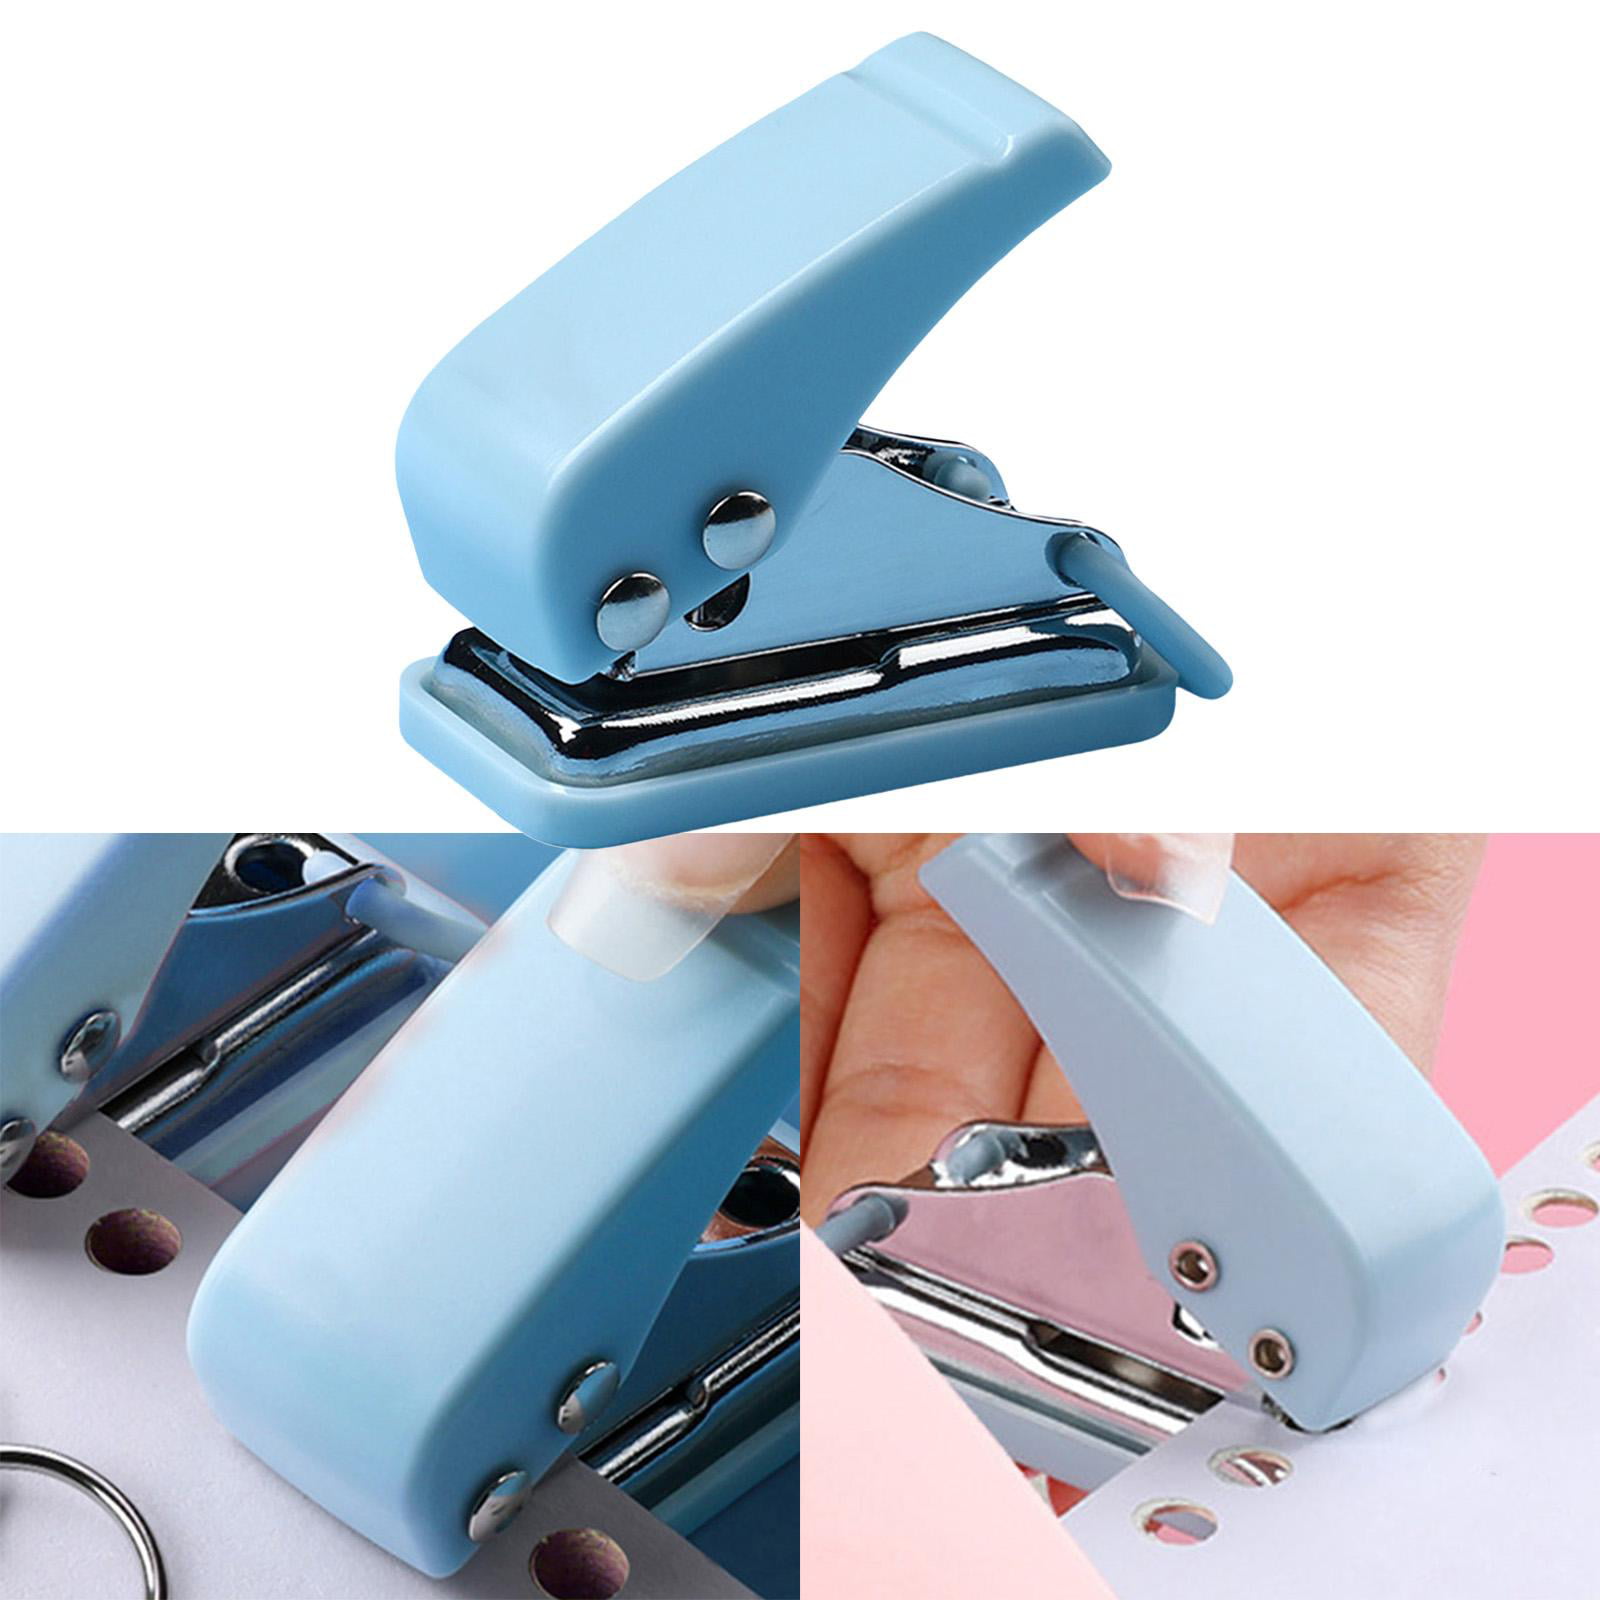 Handheld Mini Single Hole Puncher Punch for Punching Ordinary Paper,  Handbook Hole 1/4 inch Children Gift Labor Saving Compact Durable Tool ,  Transparent 